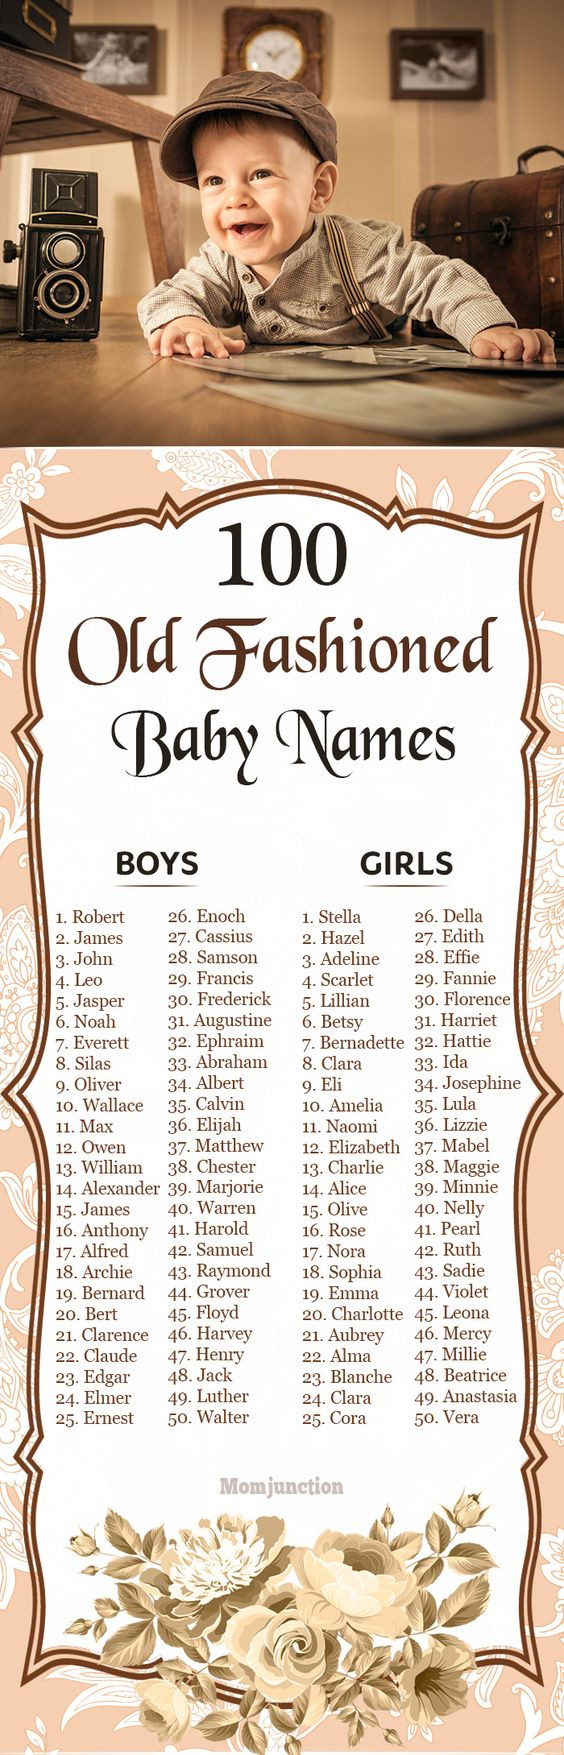 Fashion Baby Names
 100 Amazing Old Fashioned Baby Names For Boys And Girls